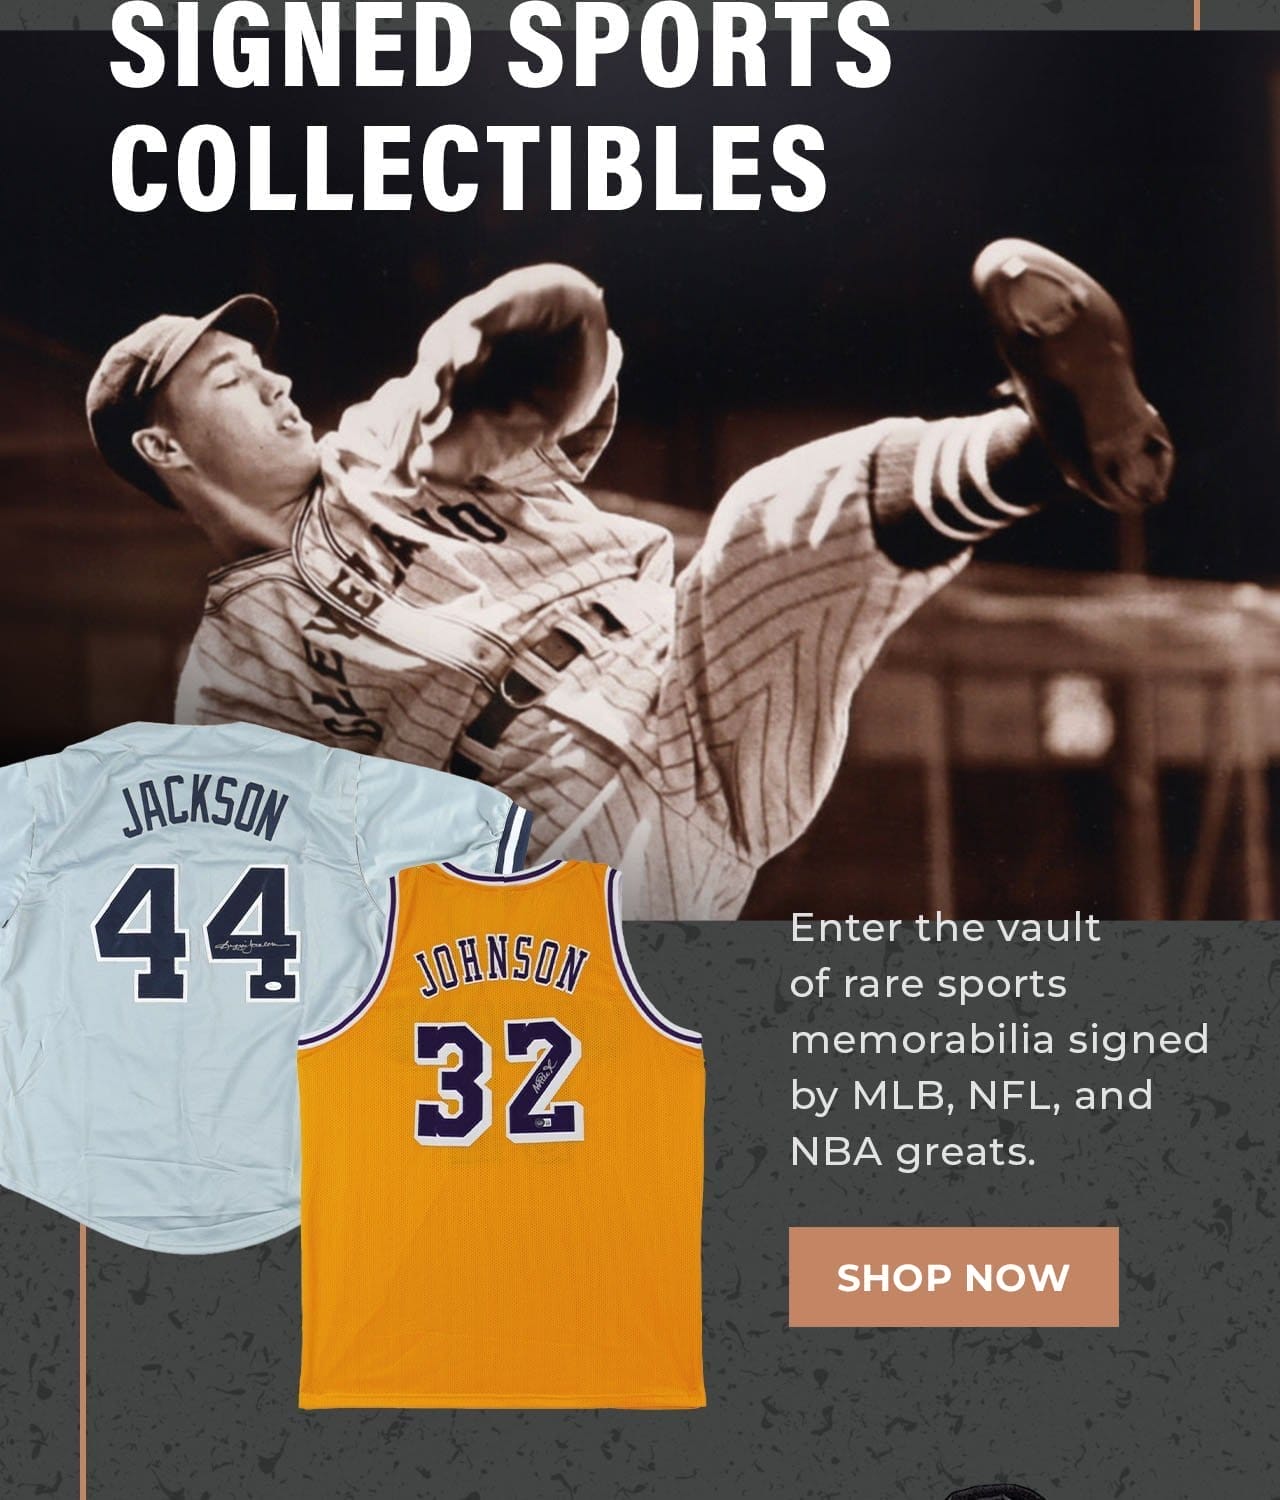 Signed Sports Collectibles | SHOP NOW